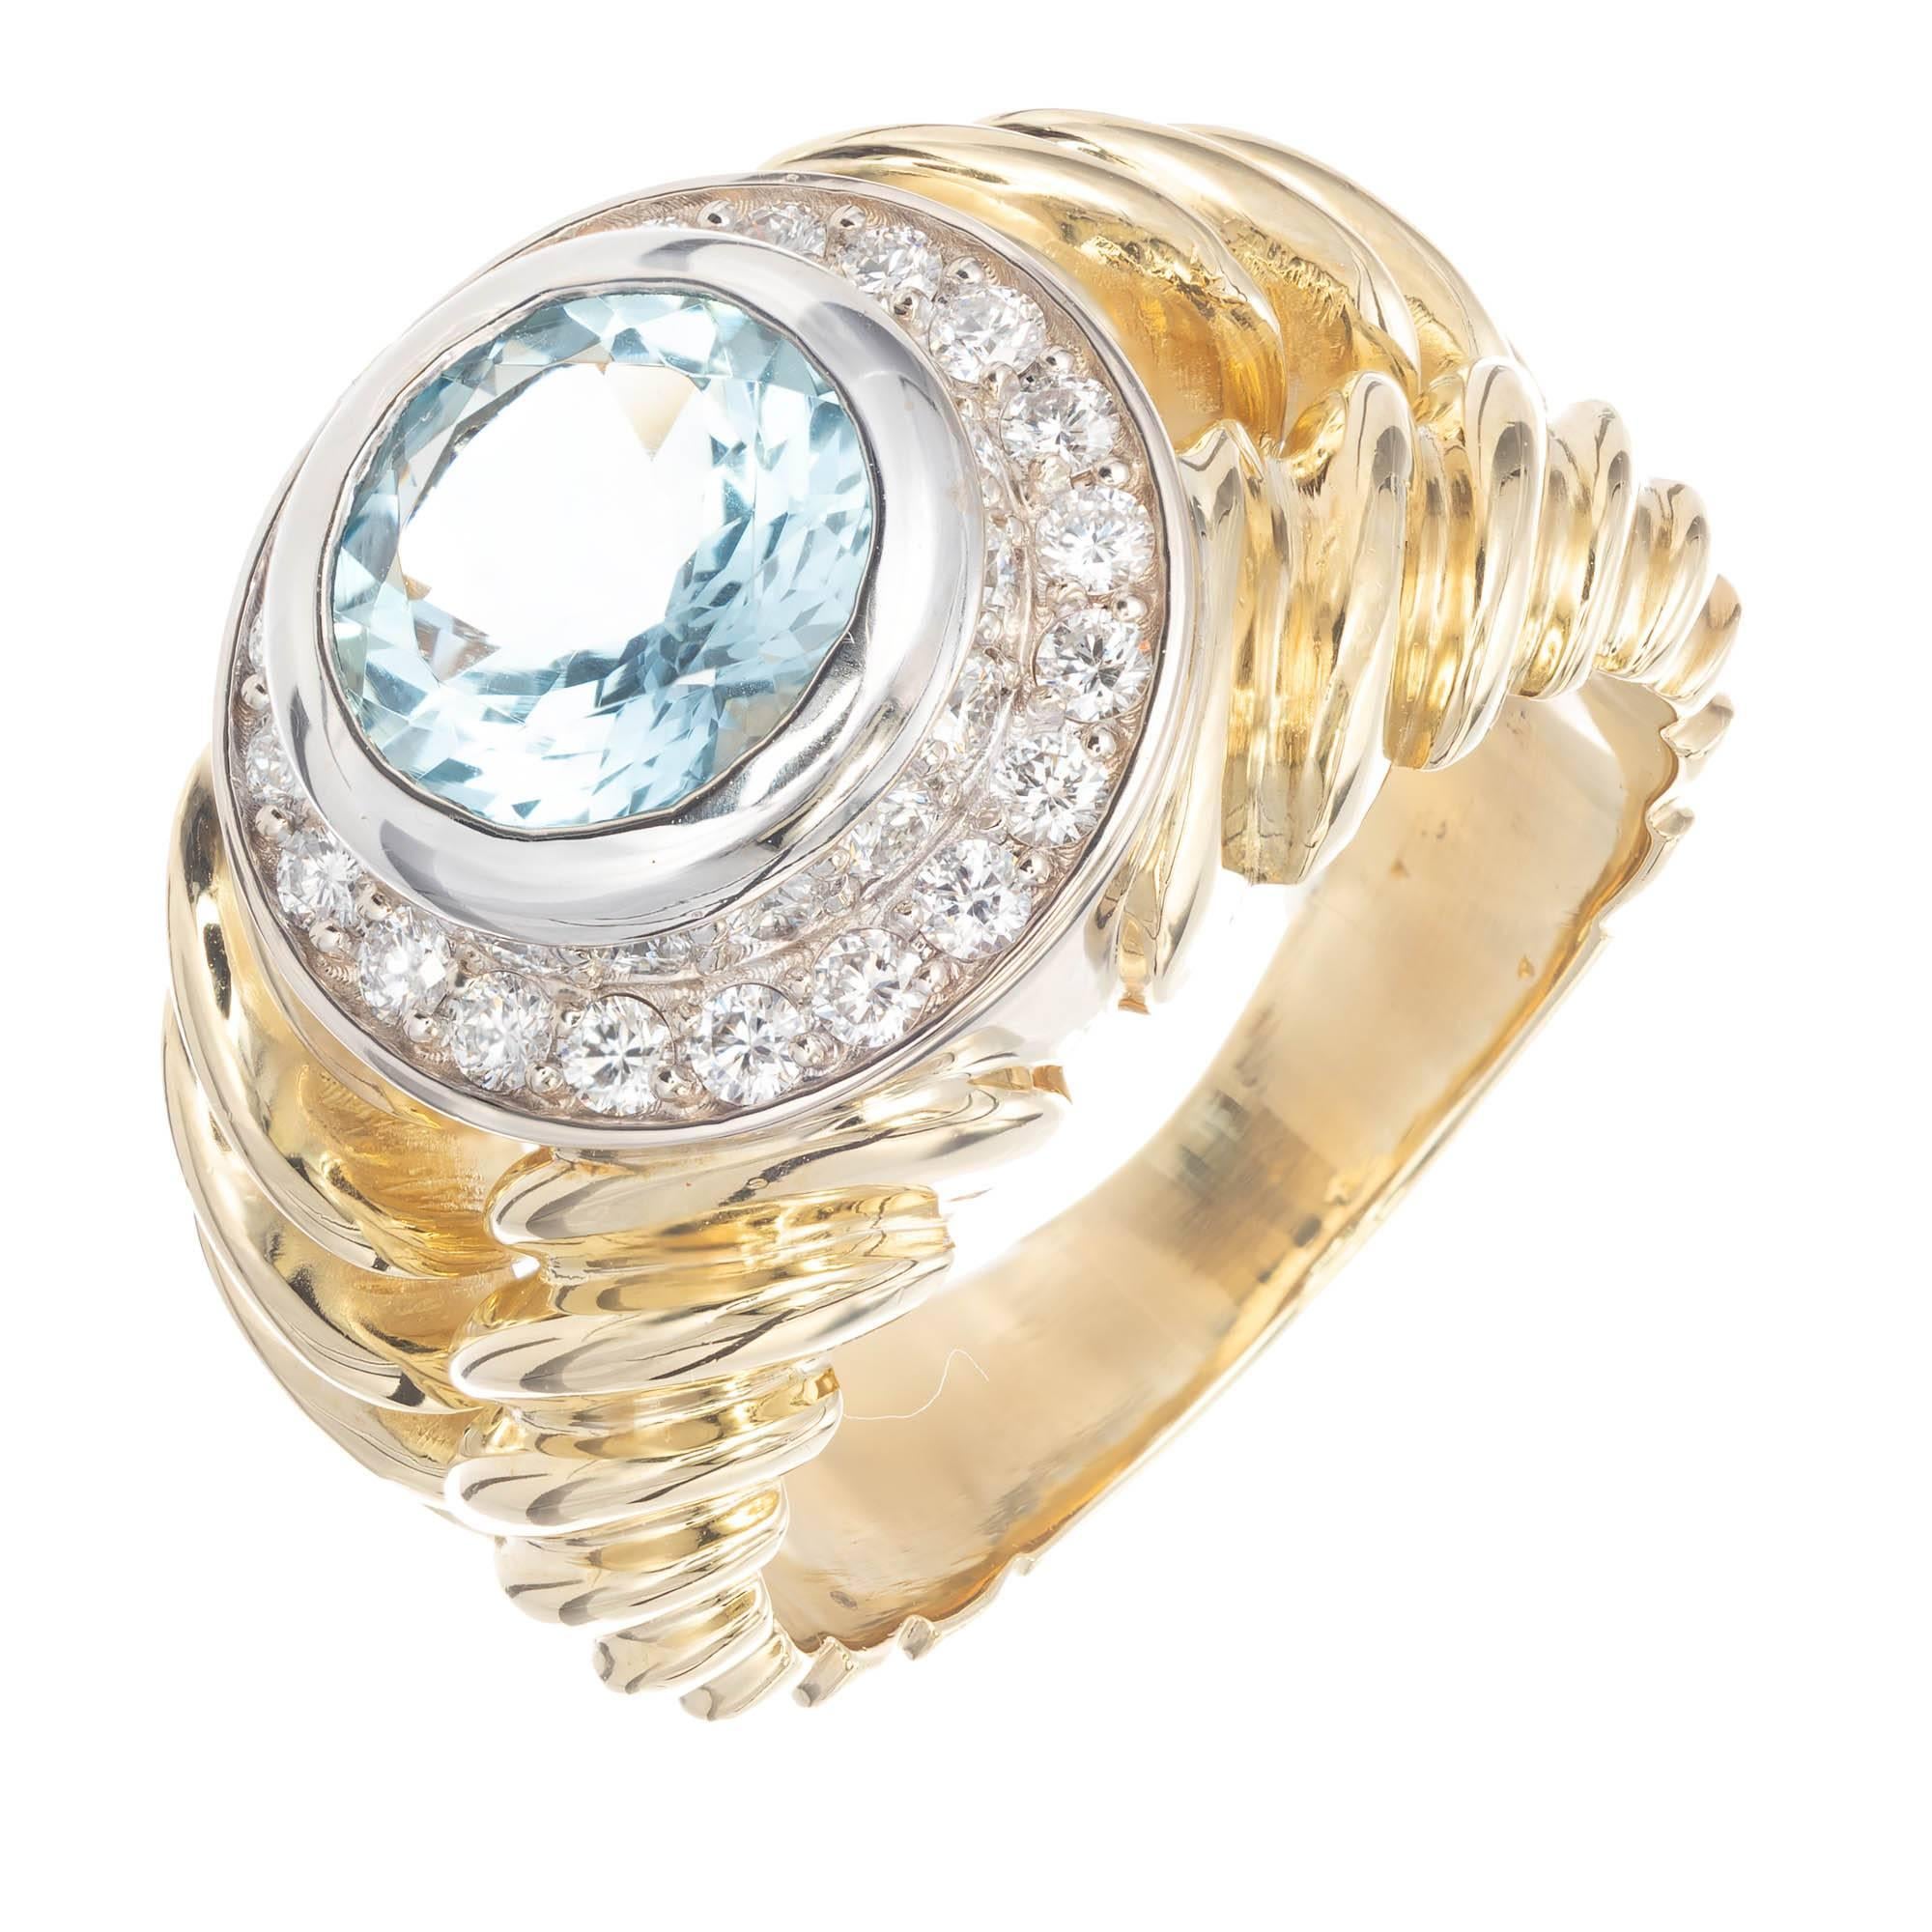 Aqua and diamond halo Solid 18k yellow and white gold double row swirl design cocktail ring. White gold top with two rows of bead set fine white full cut diamonds and a bright gem cut Aqua. 

1 round European cut untreated Aqua, approx. total weight